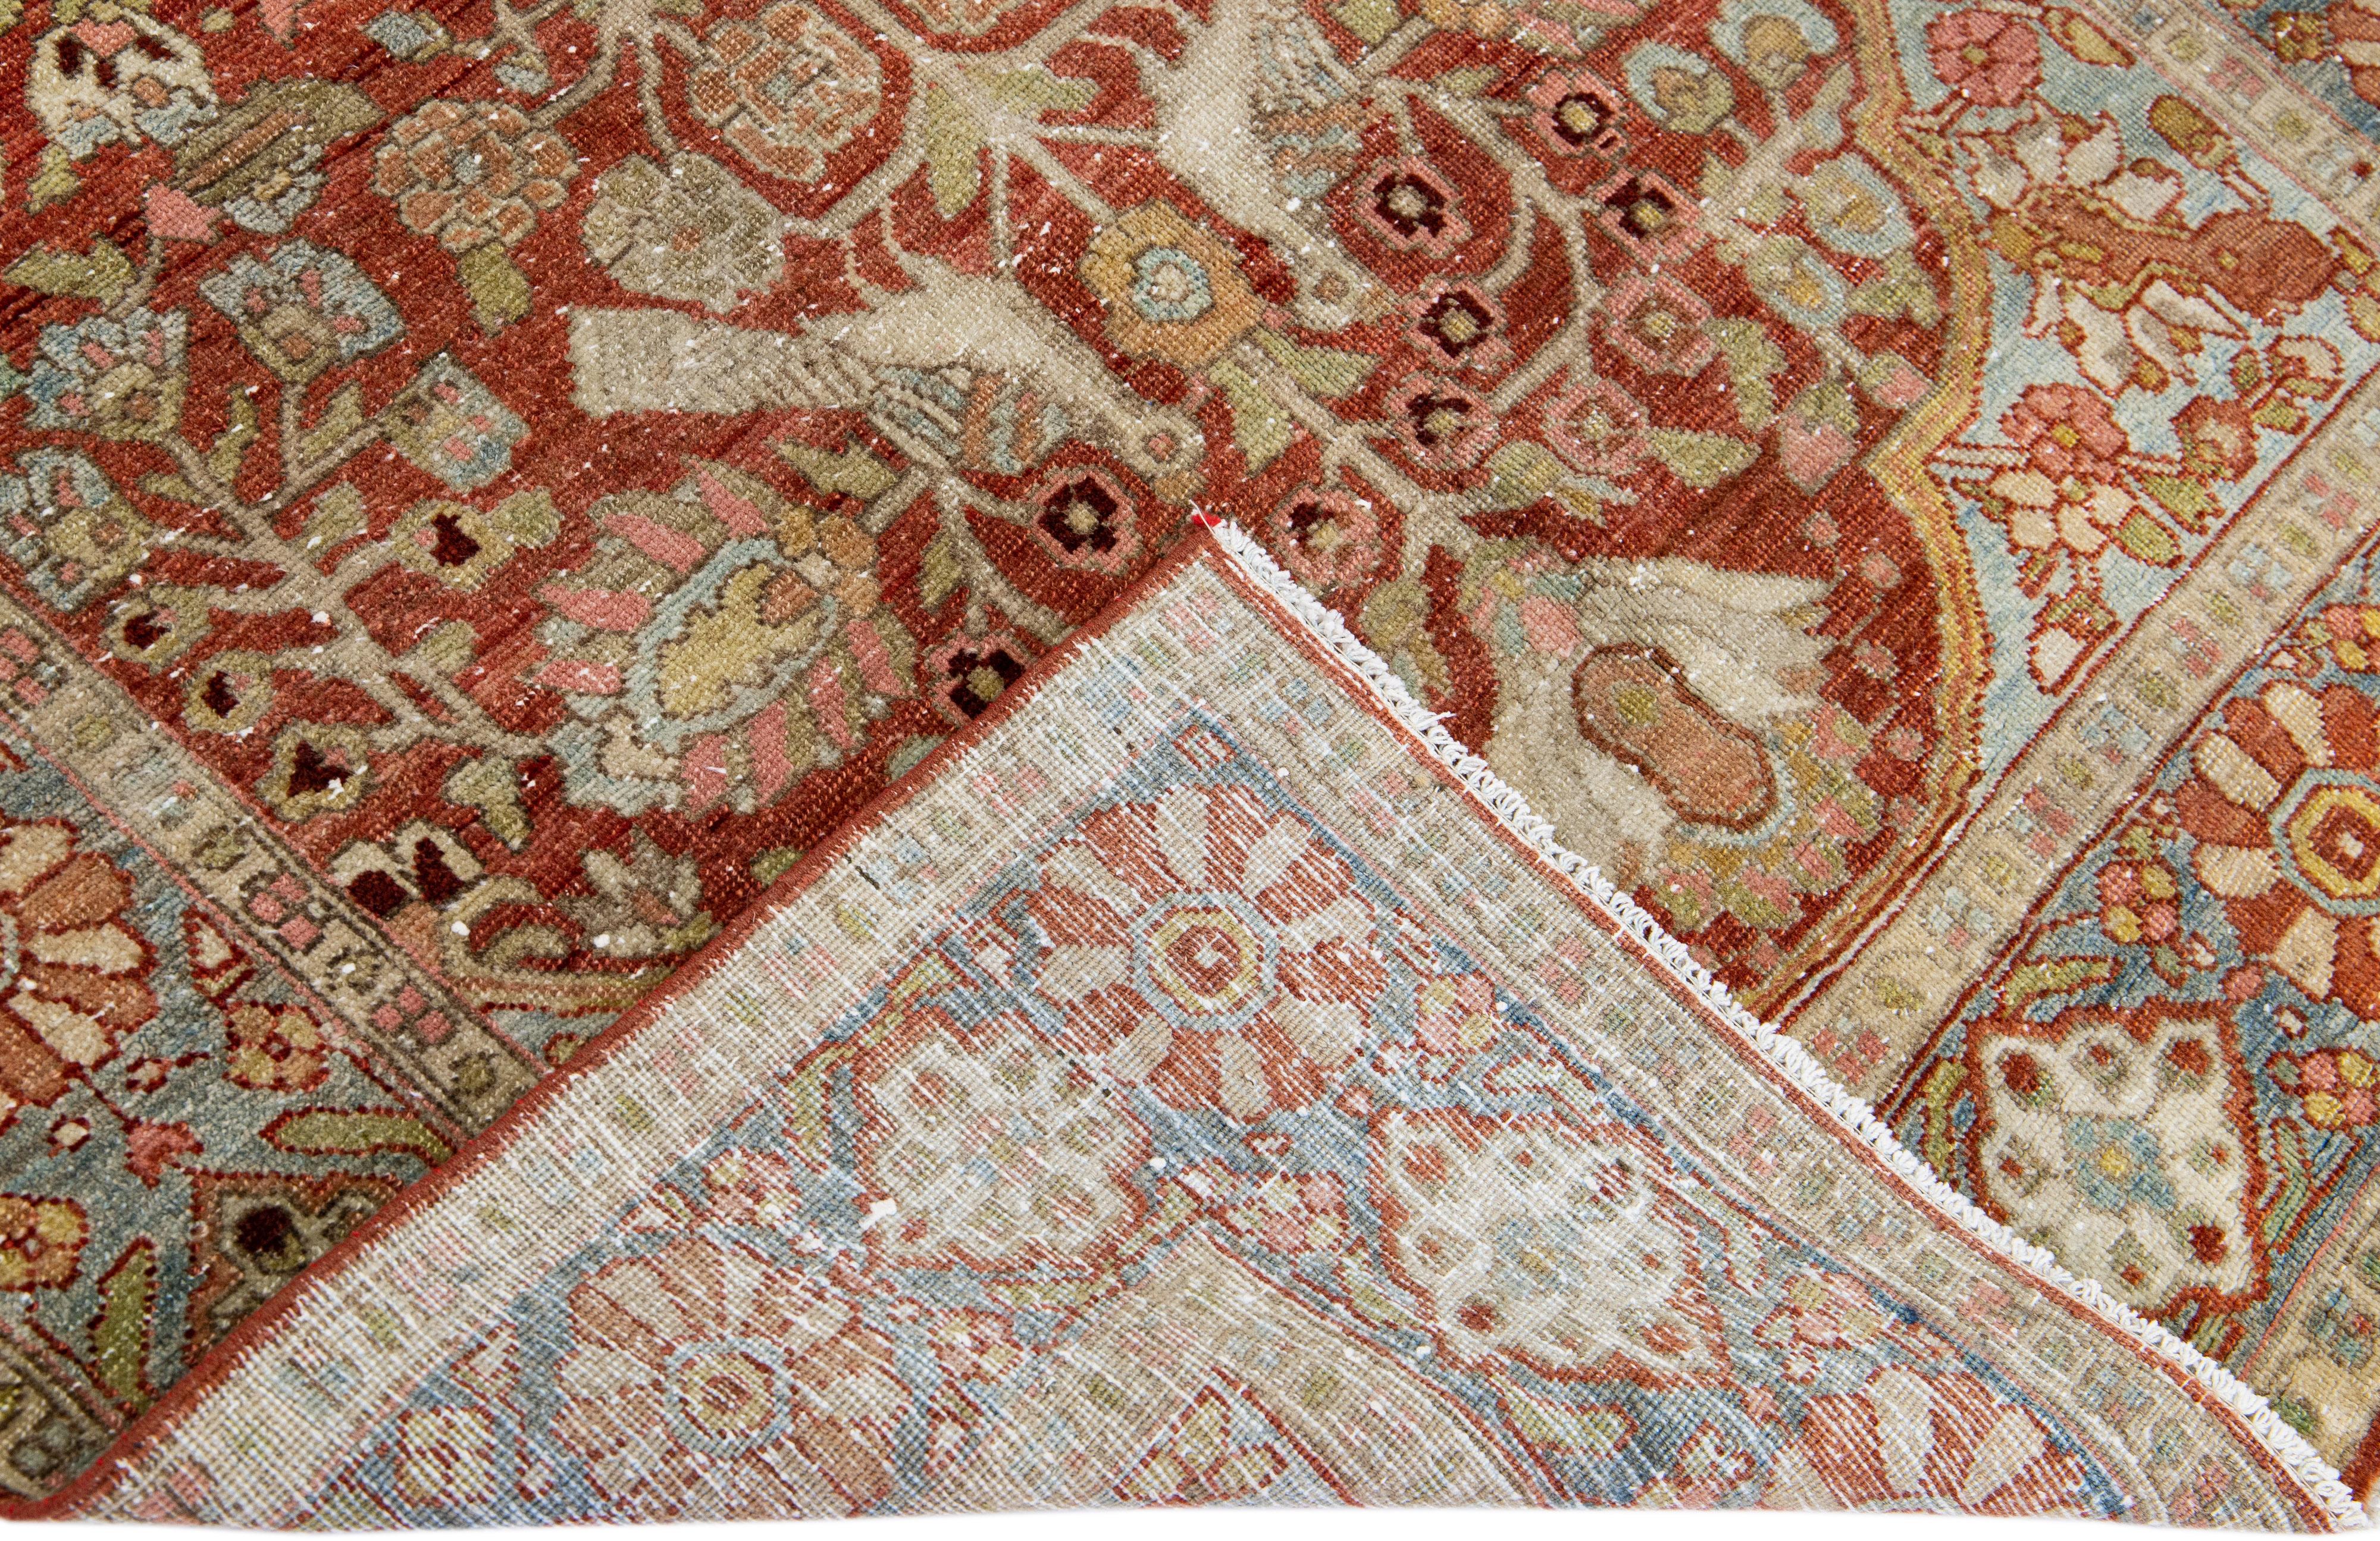 Beautiful antique Bakhtiari hand-knotted wool rug with a red field. This piece rug has a blue frame with multicolor accents on a gorgeous classic multi medallion floral design

This rug measures 4'8